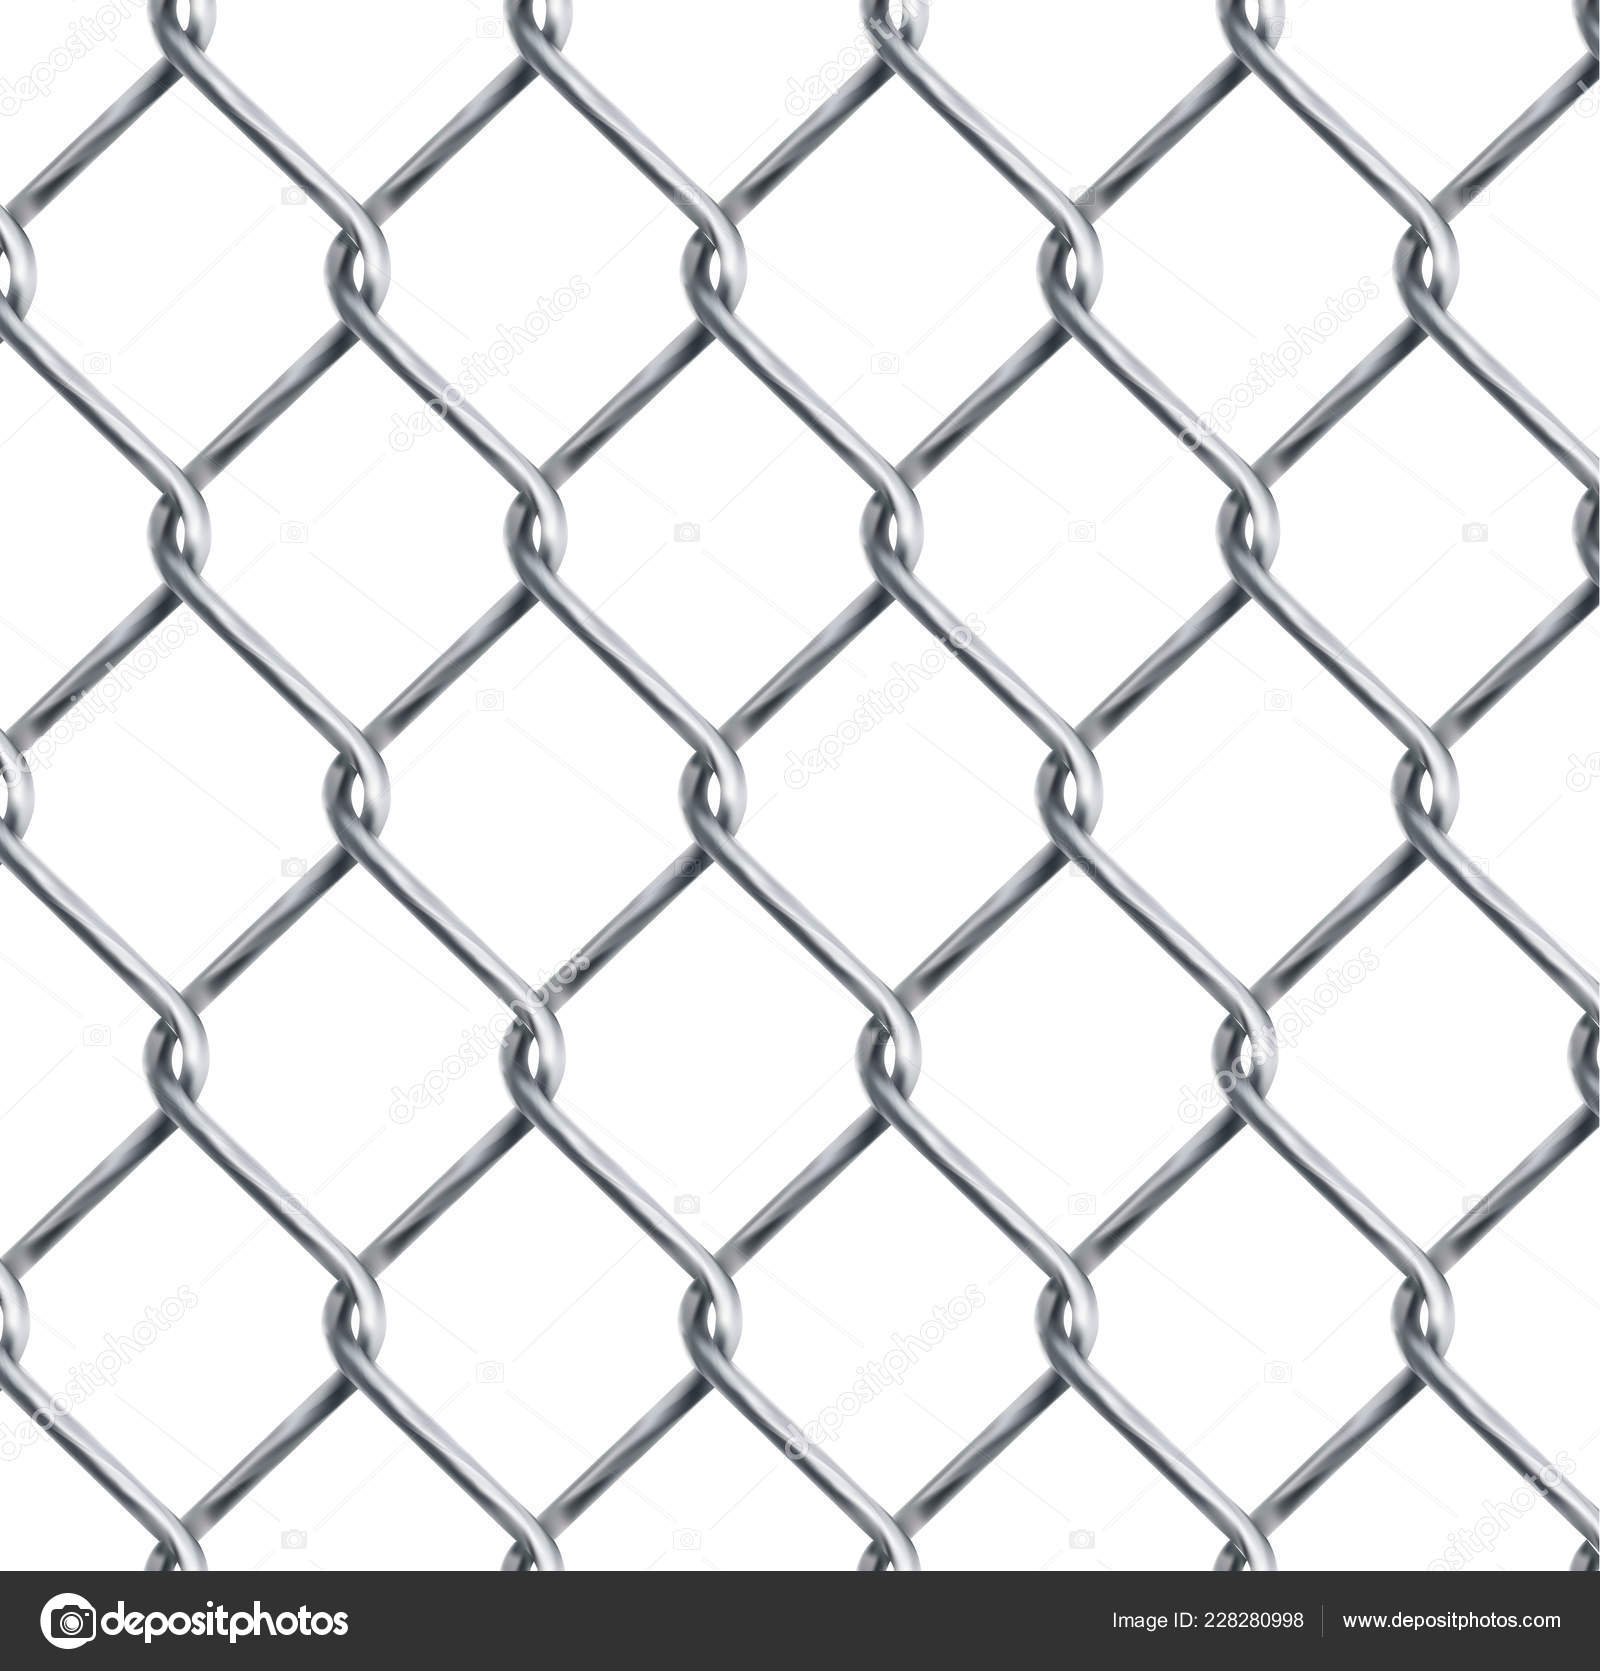 Realistic Chain Link Chain Link Fencing Texture Isolated On Transparency Background Metal Wire Mesh Fence Design Element Vector Illustration Stock Vector C Kabzon300 Gmail Com 228280998,Small Living Room Home Interior Design